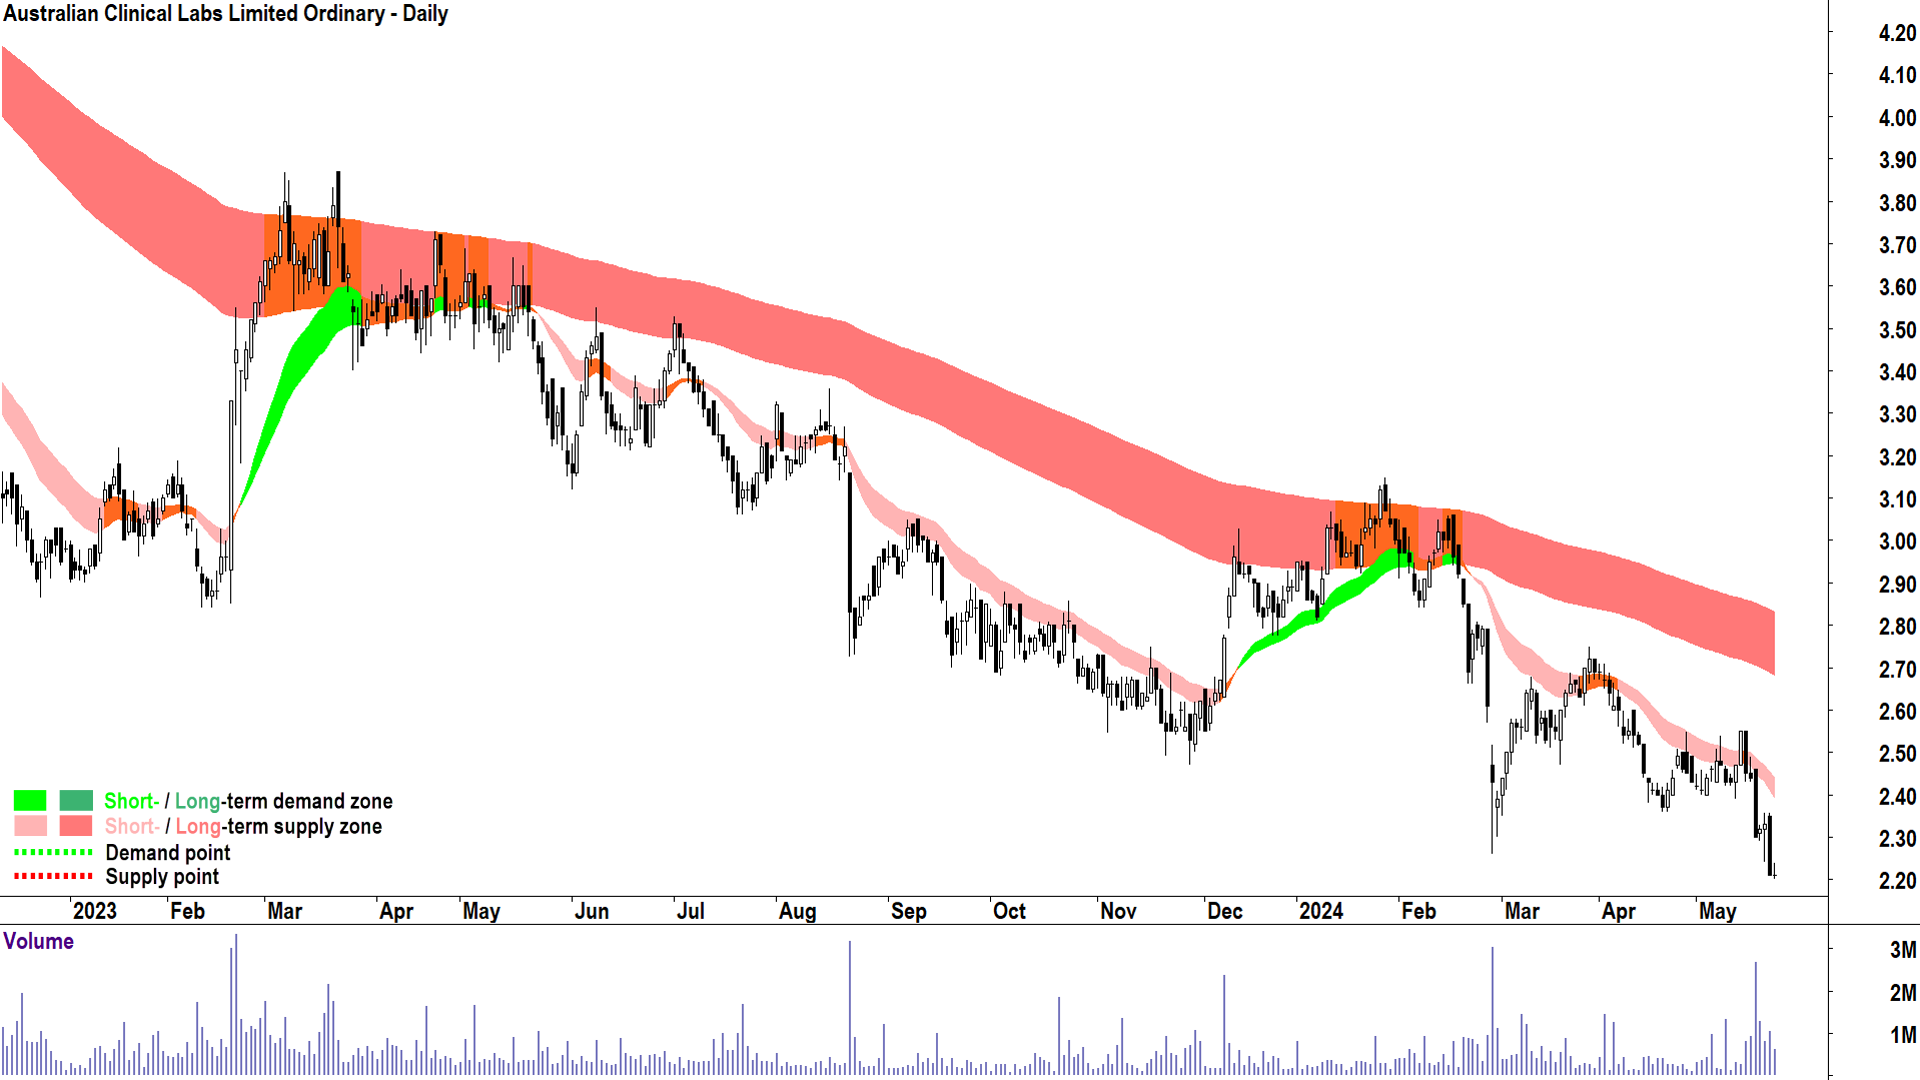 Australian Clinical Labs (ASX-ACL) chart 23 May 2024